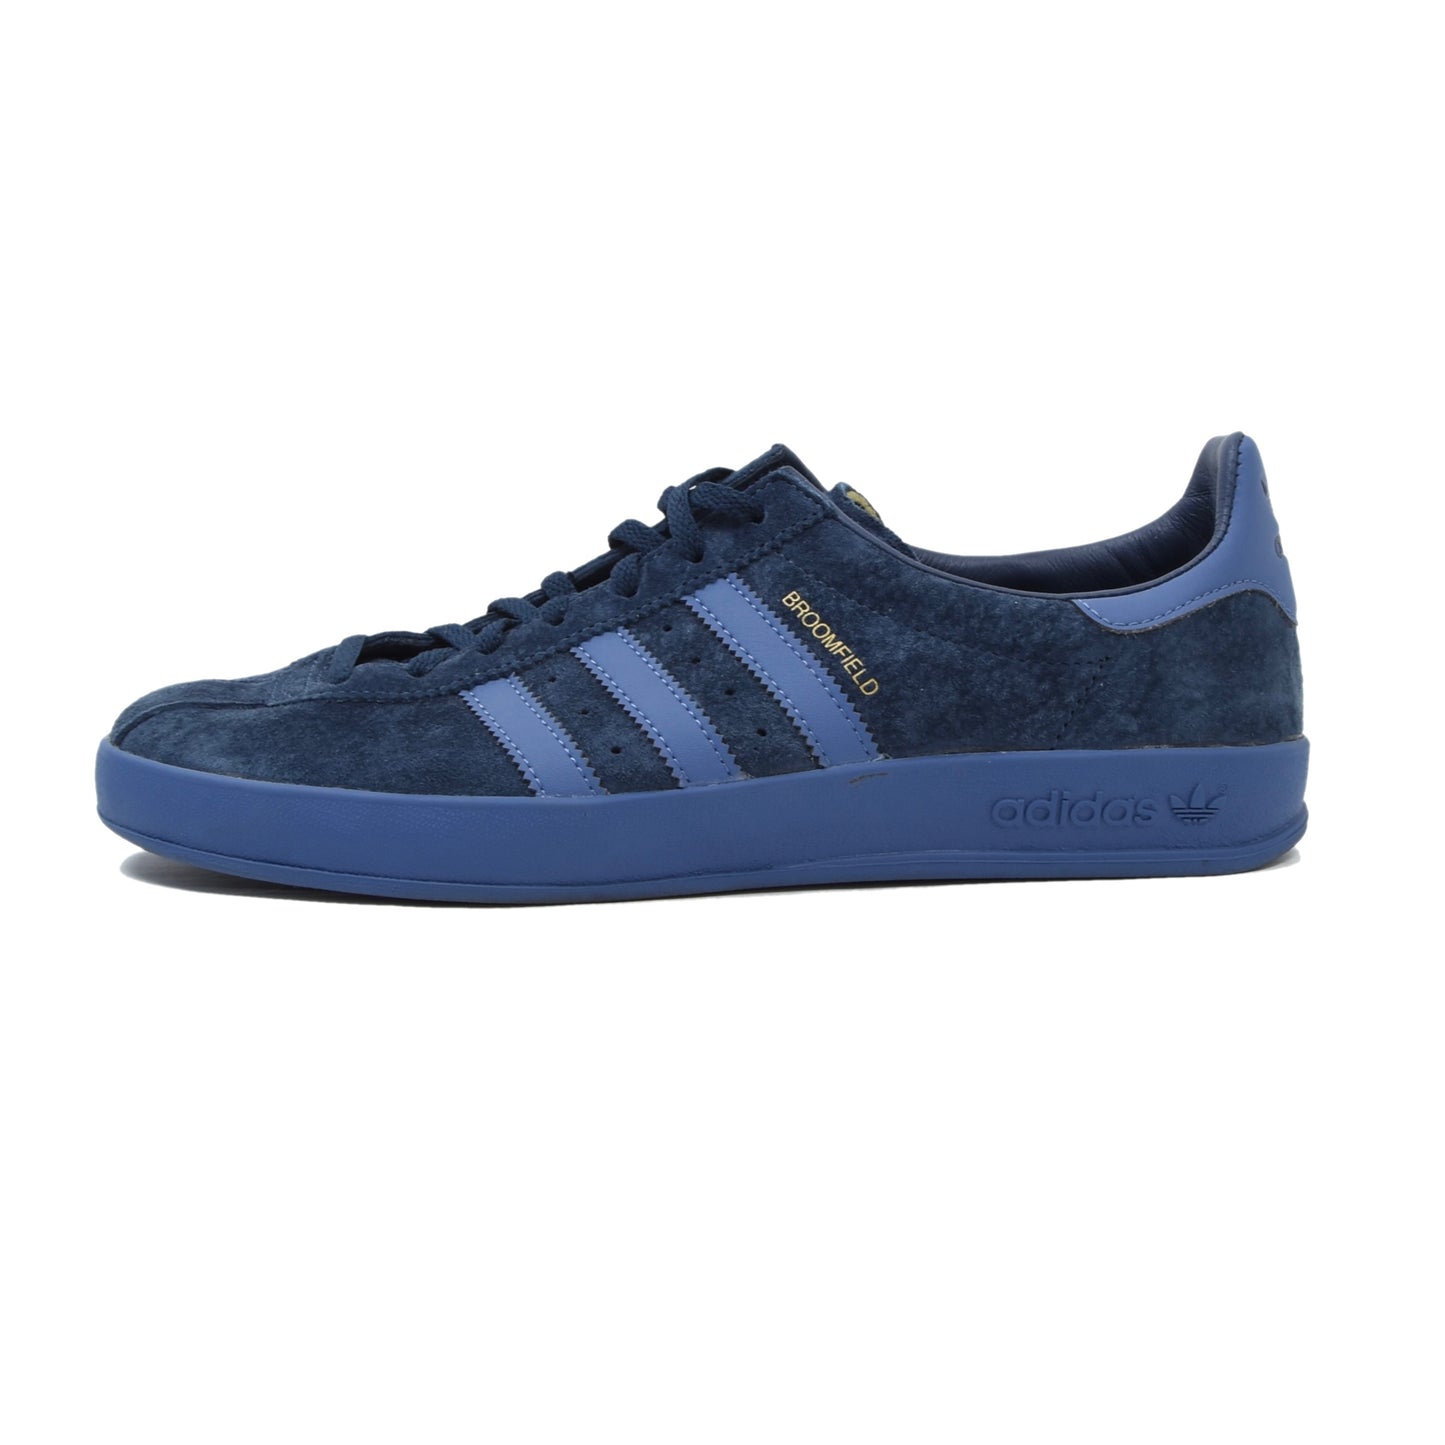 Adidas Broomfield Suede Sneakers Size 43 1/3 - Blue